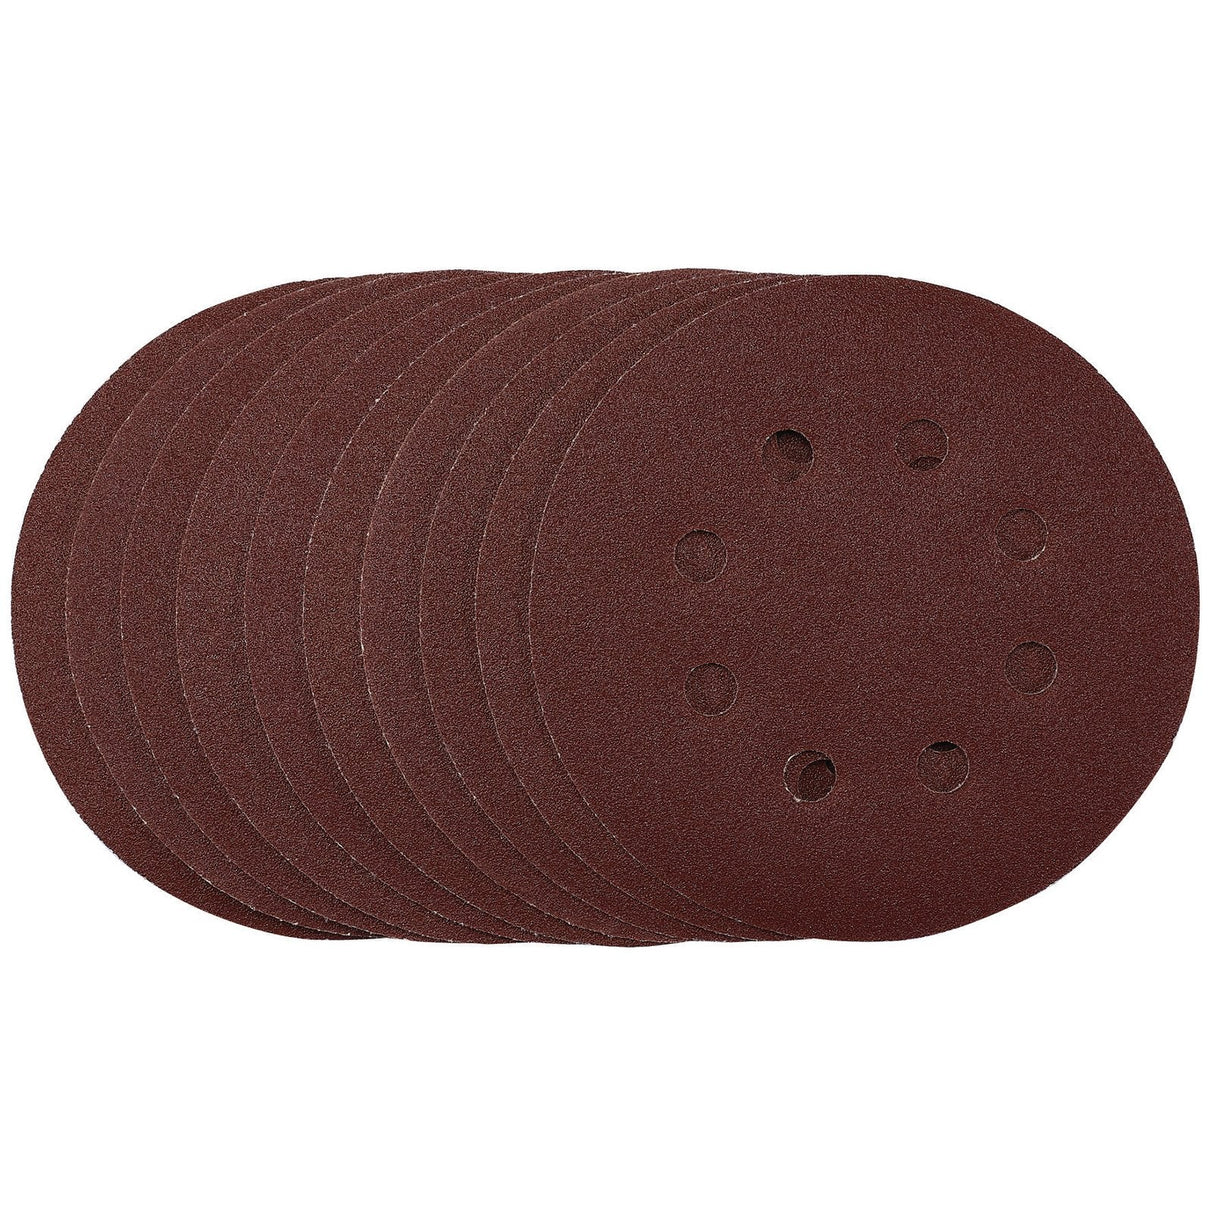 Draper Punched Sanding Discs, 125mm, Hook & Loop, 120 Grit, (Pack Of 10) - SDHAL125 - Farming Parts